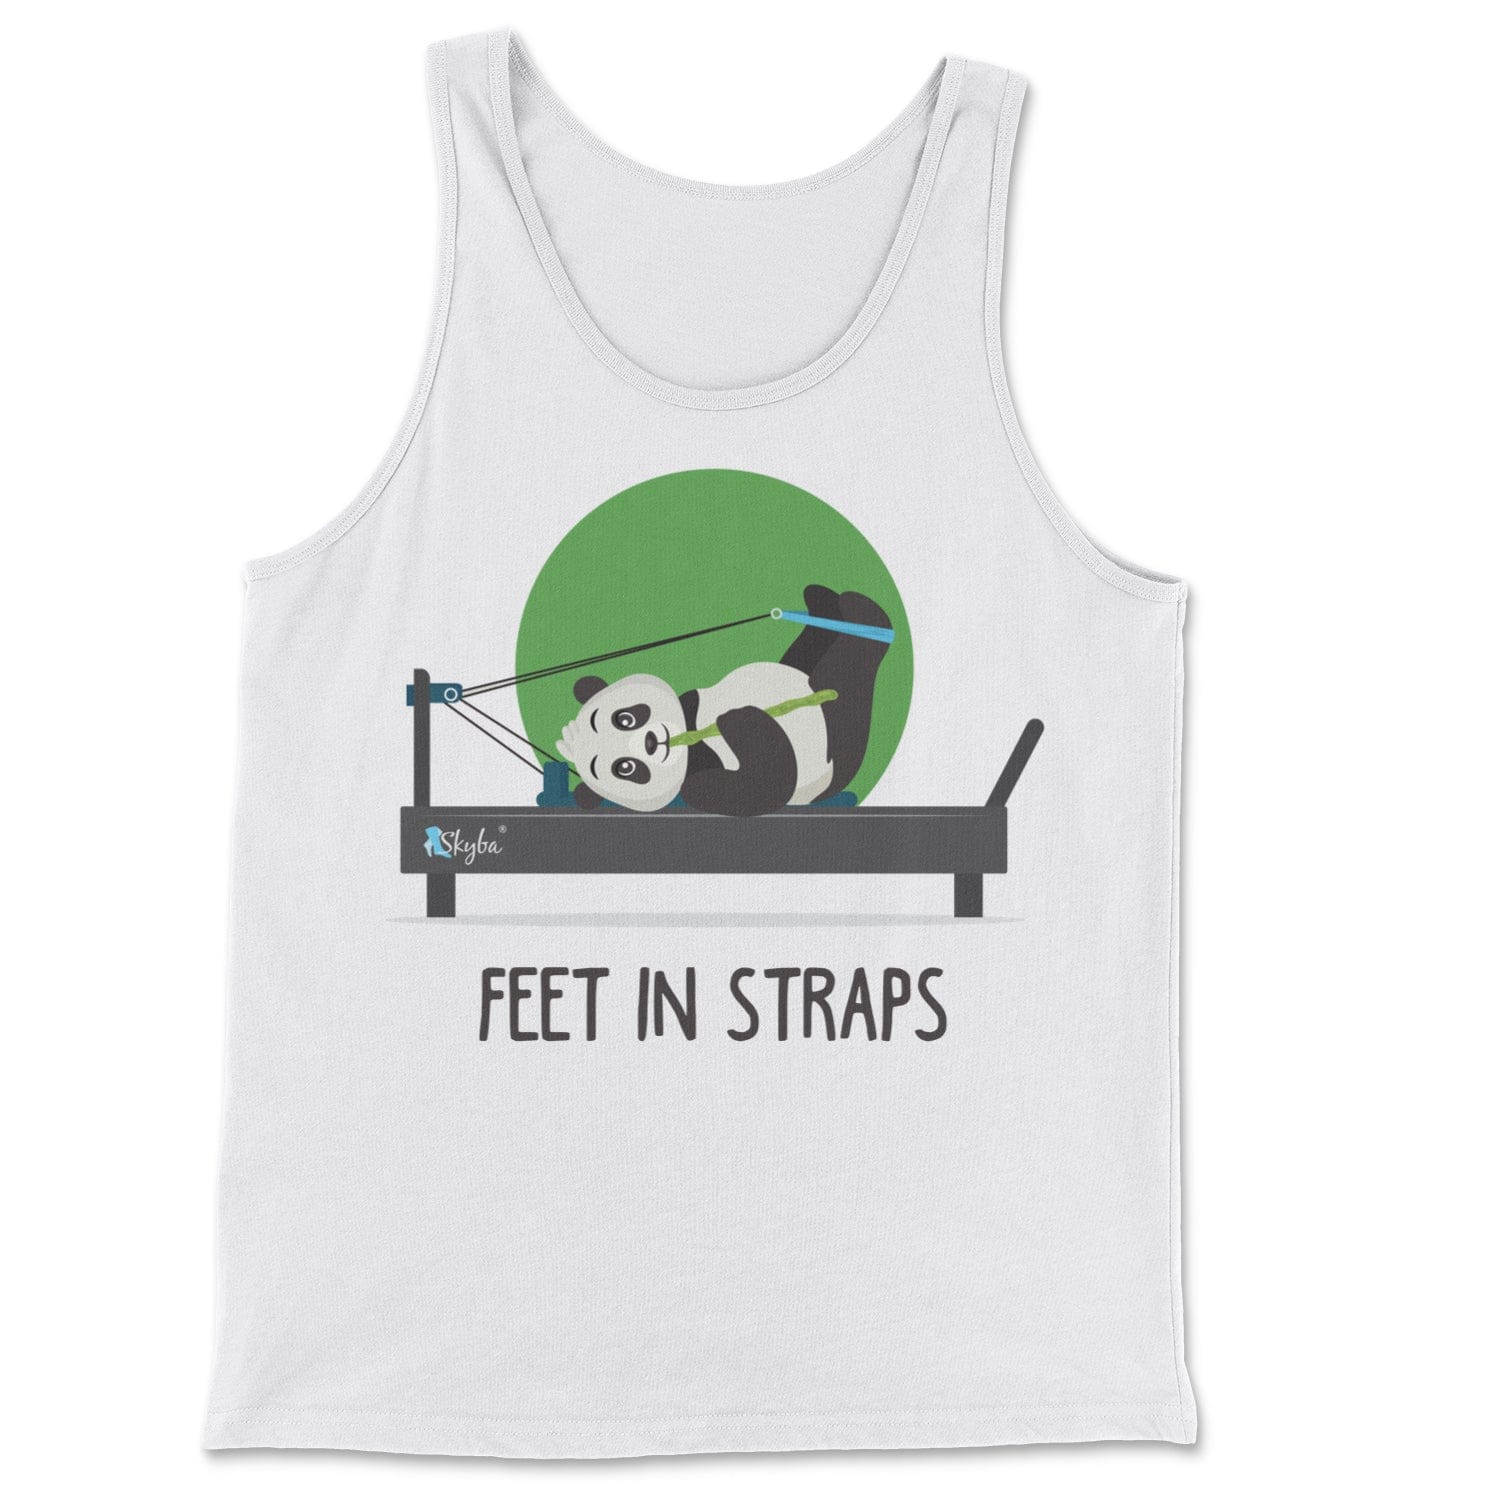 "Feet in Straps" Panda on Reformer - Classic Tank Skyba Print Material